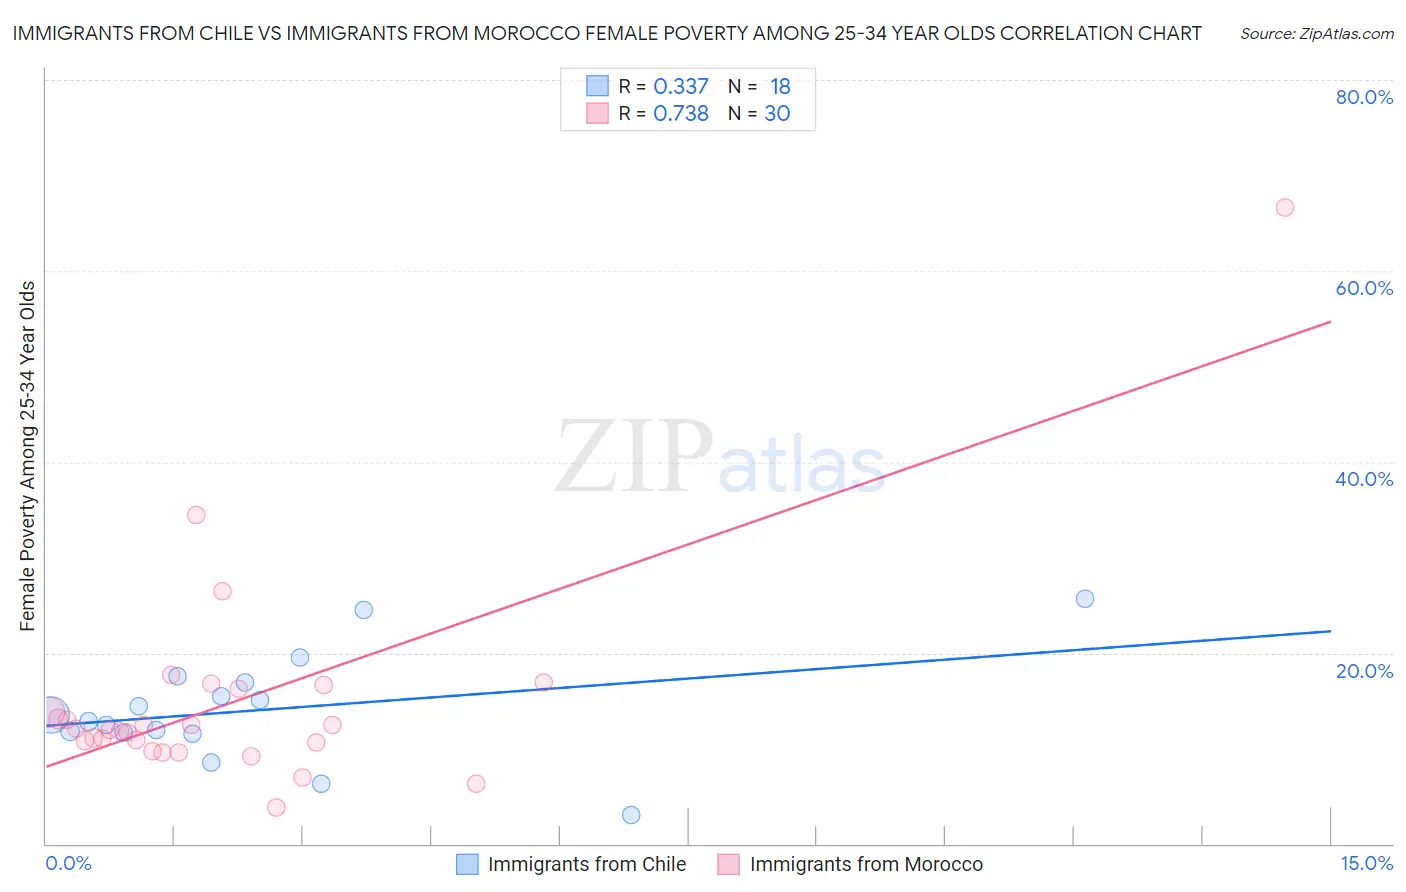 Immigrants from Chile vs Immigrants from Morocco Female Poverty Among 25-34 Year Olds